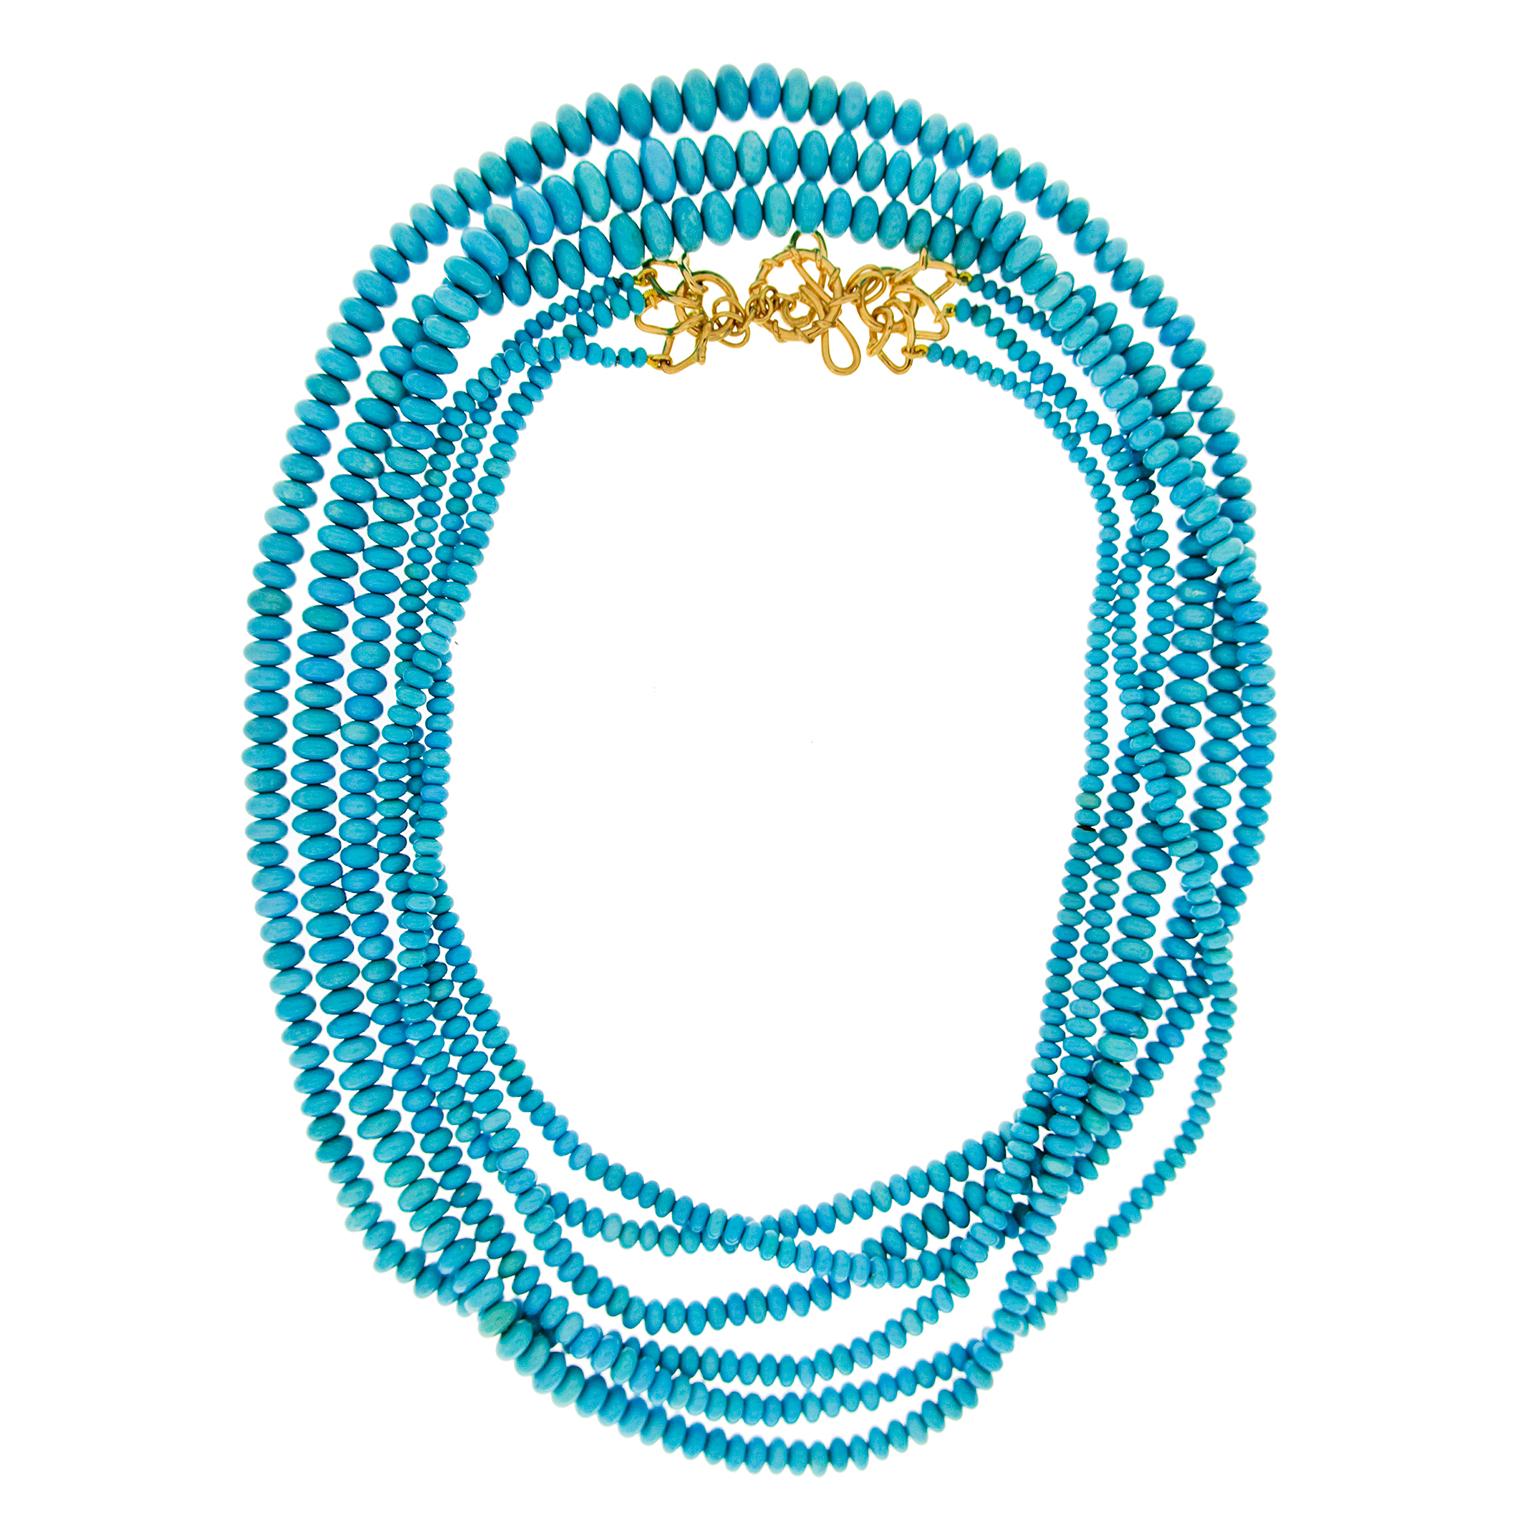 Three-Strand Turquoise Necklace twist with blue. The jewel of choice is sleeping beauty turquoise, selected for their uniform hues without a hint of matrix. They’re carved into roundels before being placed on one of three cords and spiraled into a